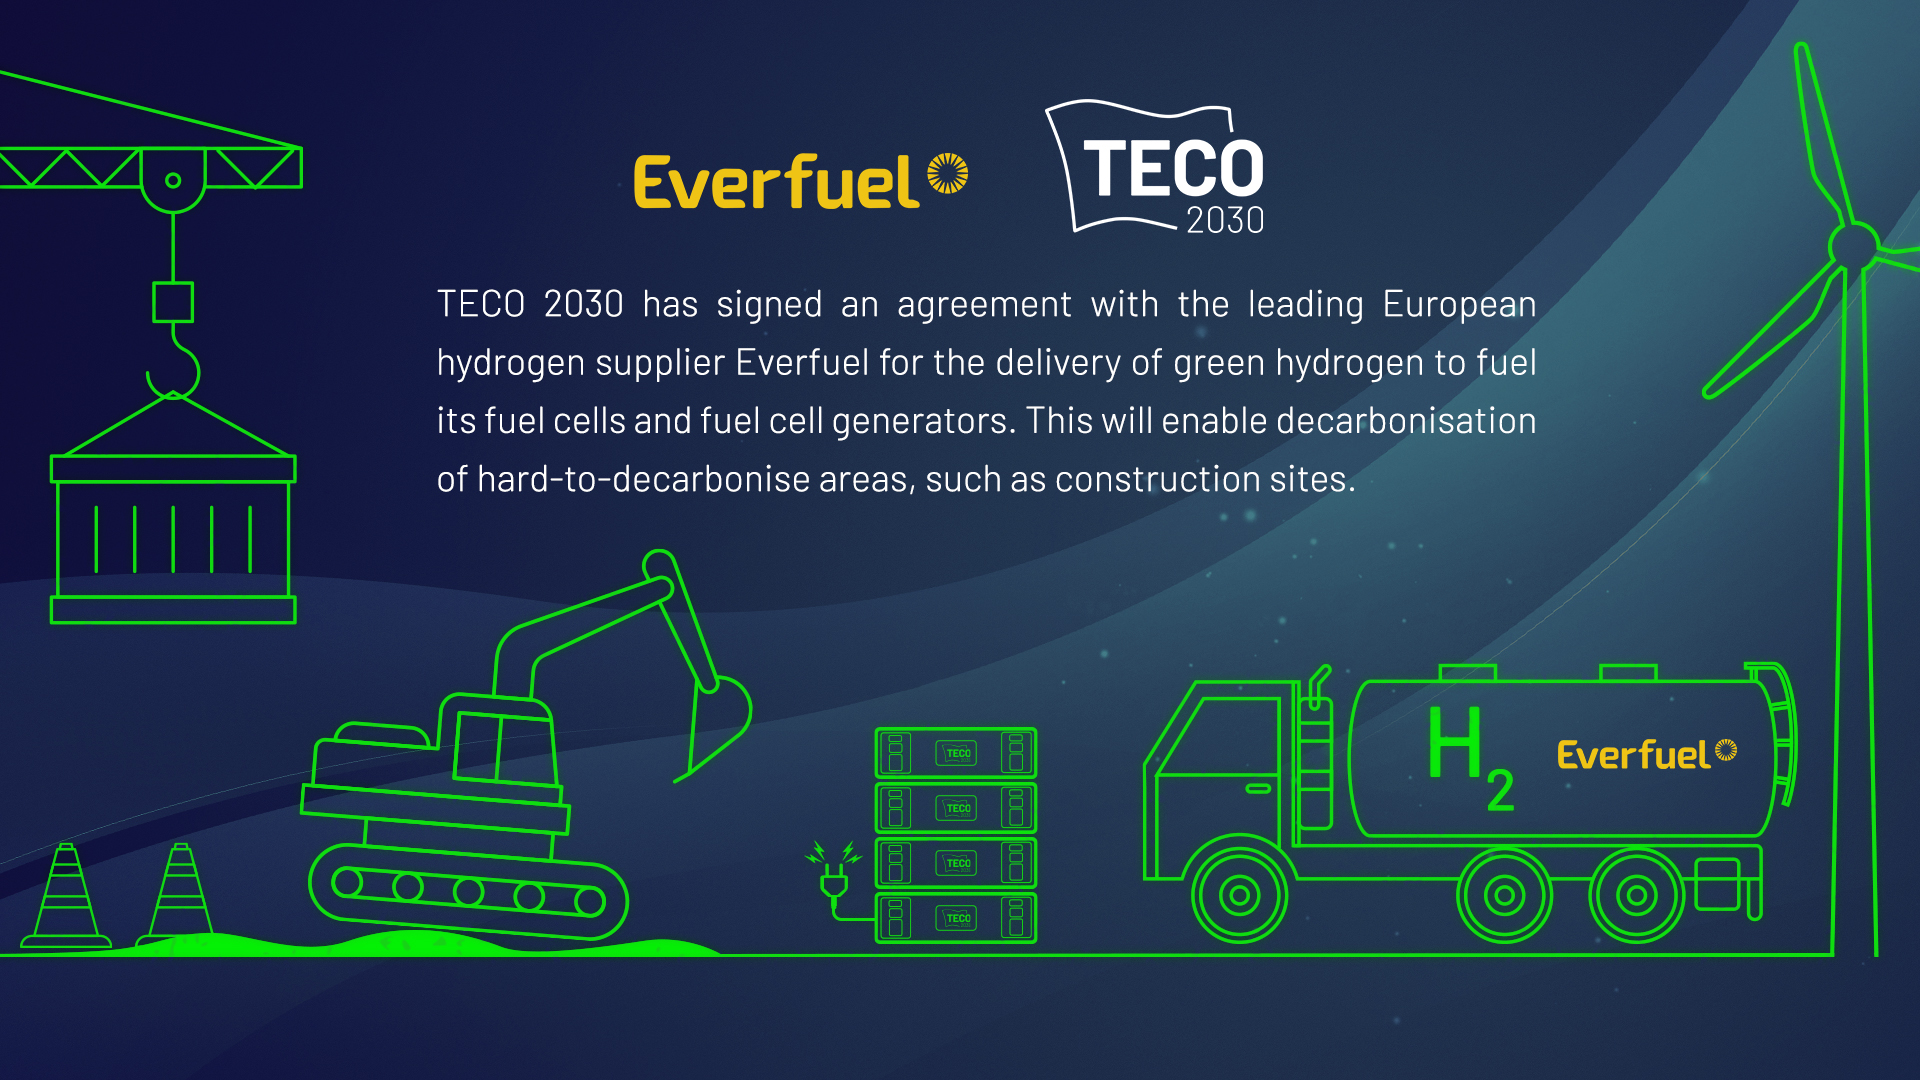 Everfuel will deliver green hydrogen to fuel TECO 2030 fuel cells and fuel cell generators. This will enable decarbonisation of hard-to-decarbonise areas, such as construction sites.